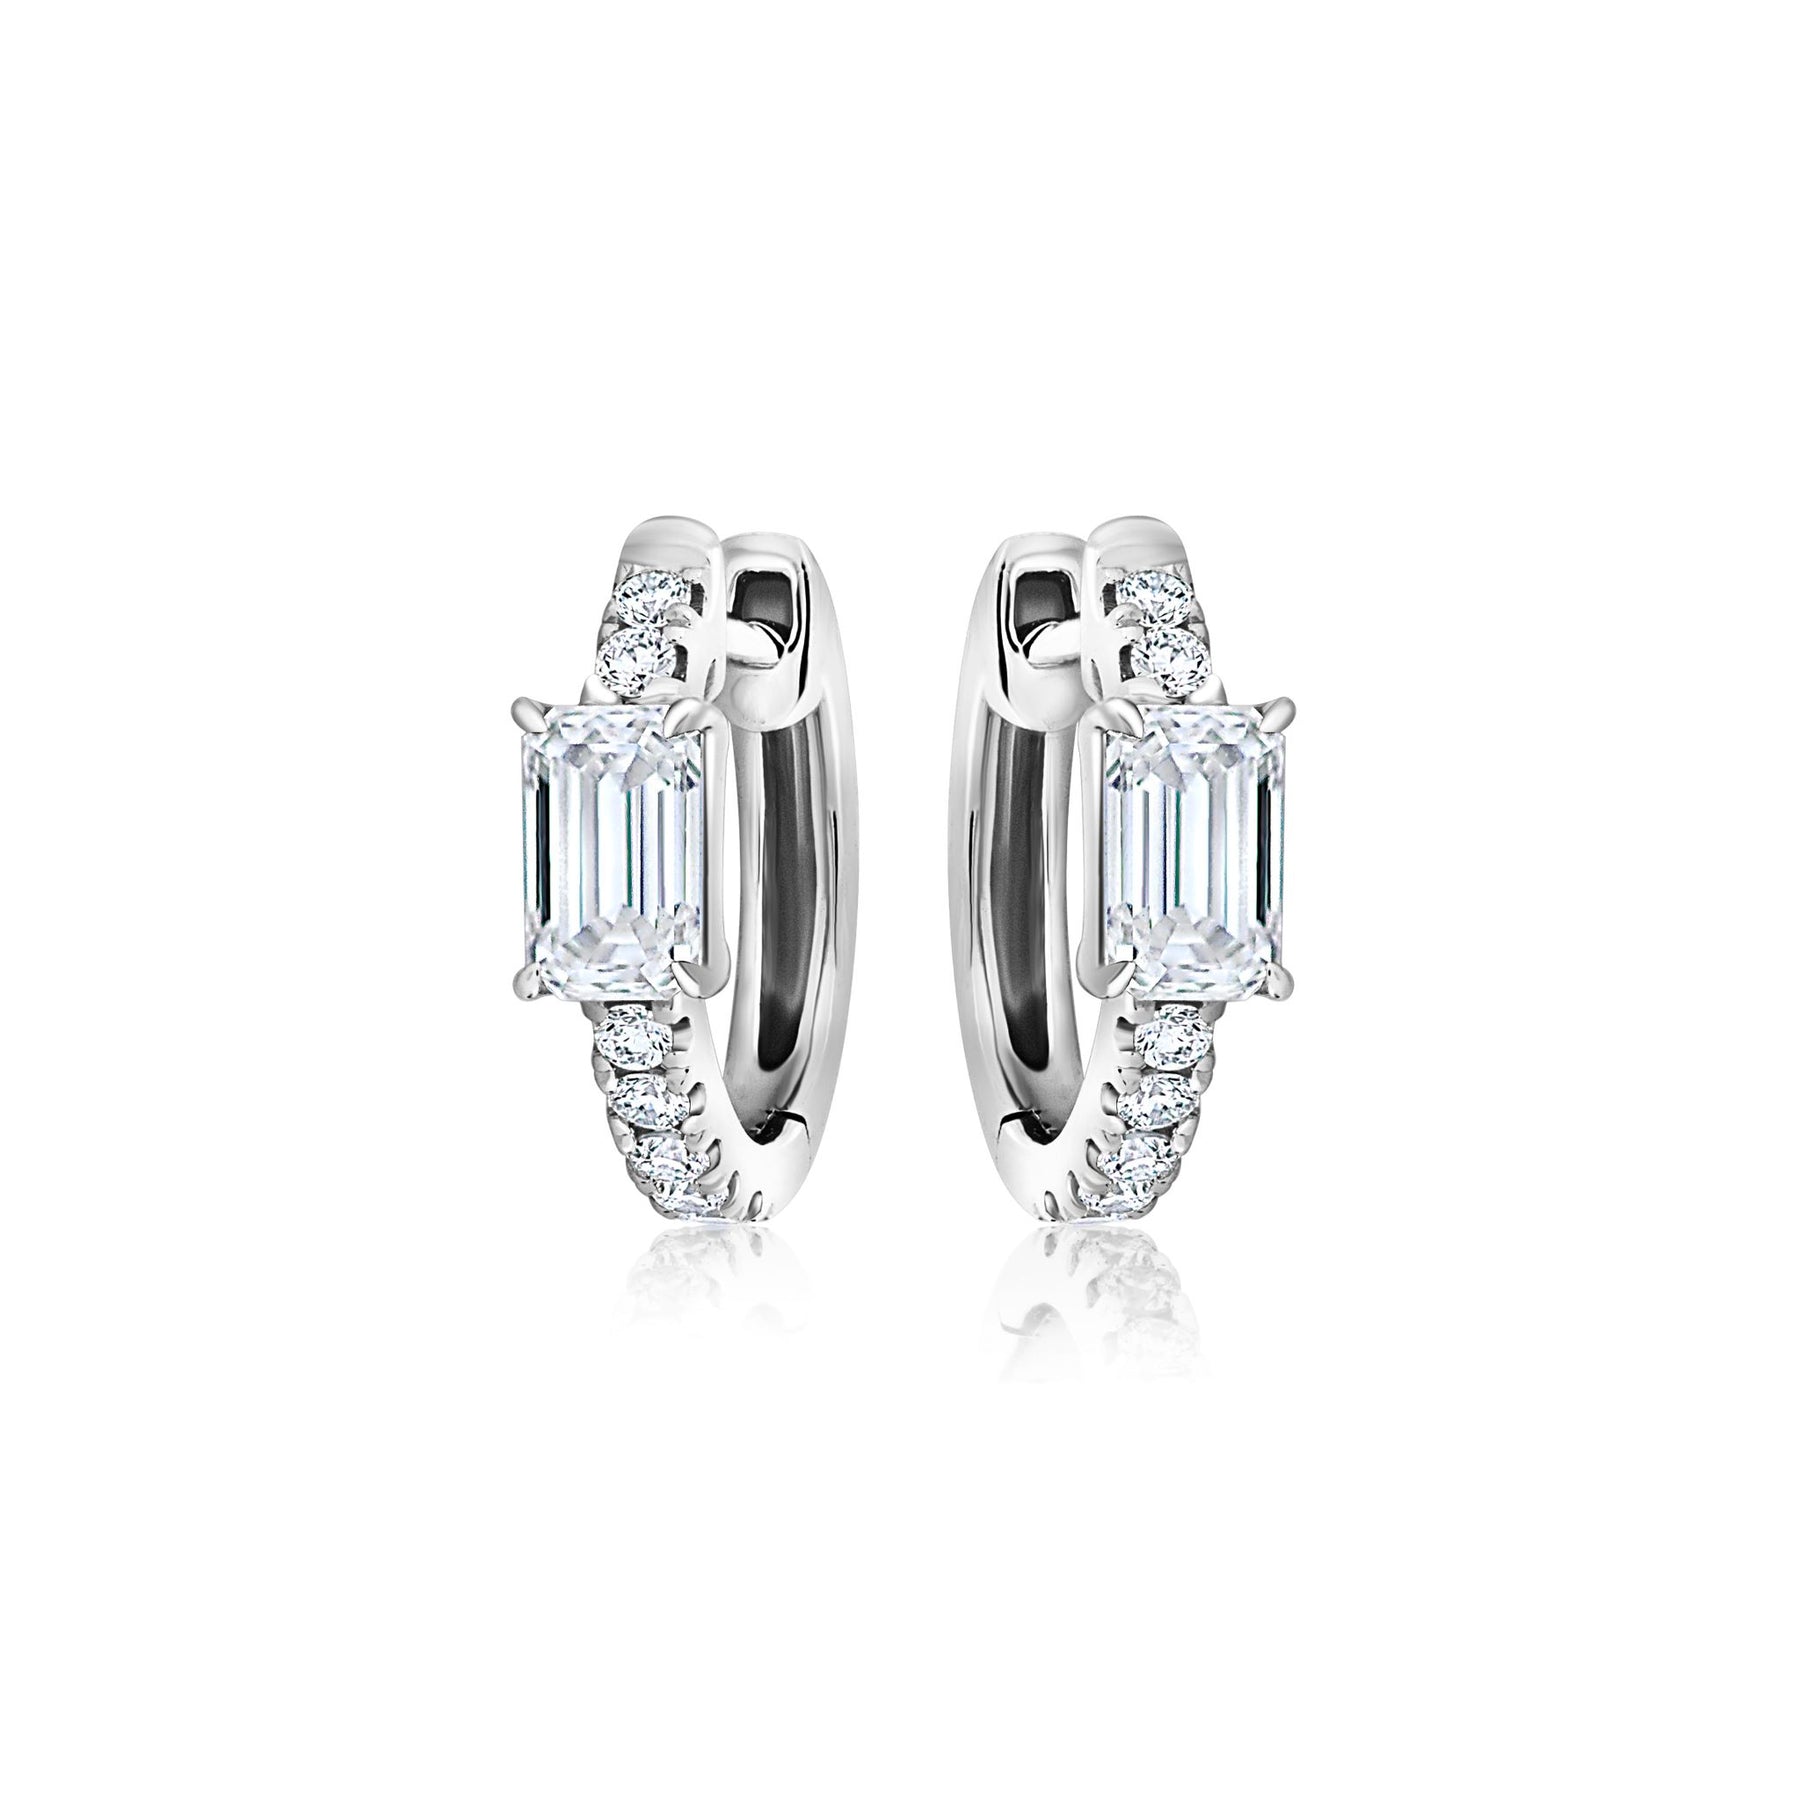 Pavé Huggie in White Gold with Emerald Cut Diamonds